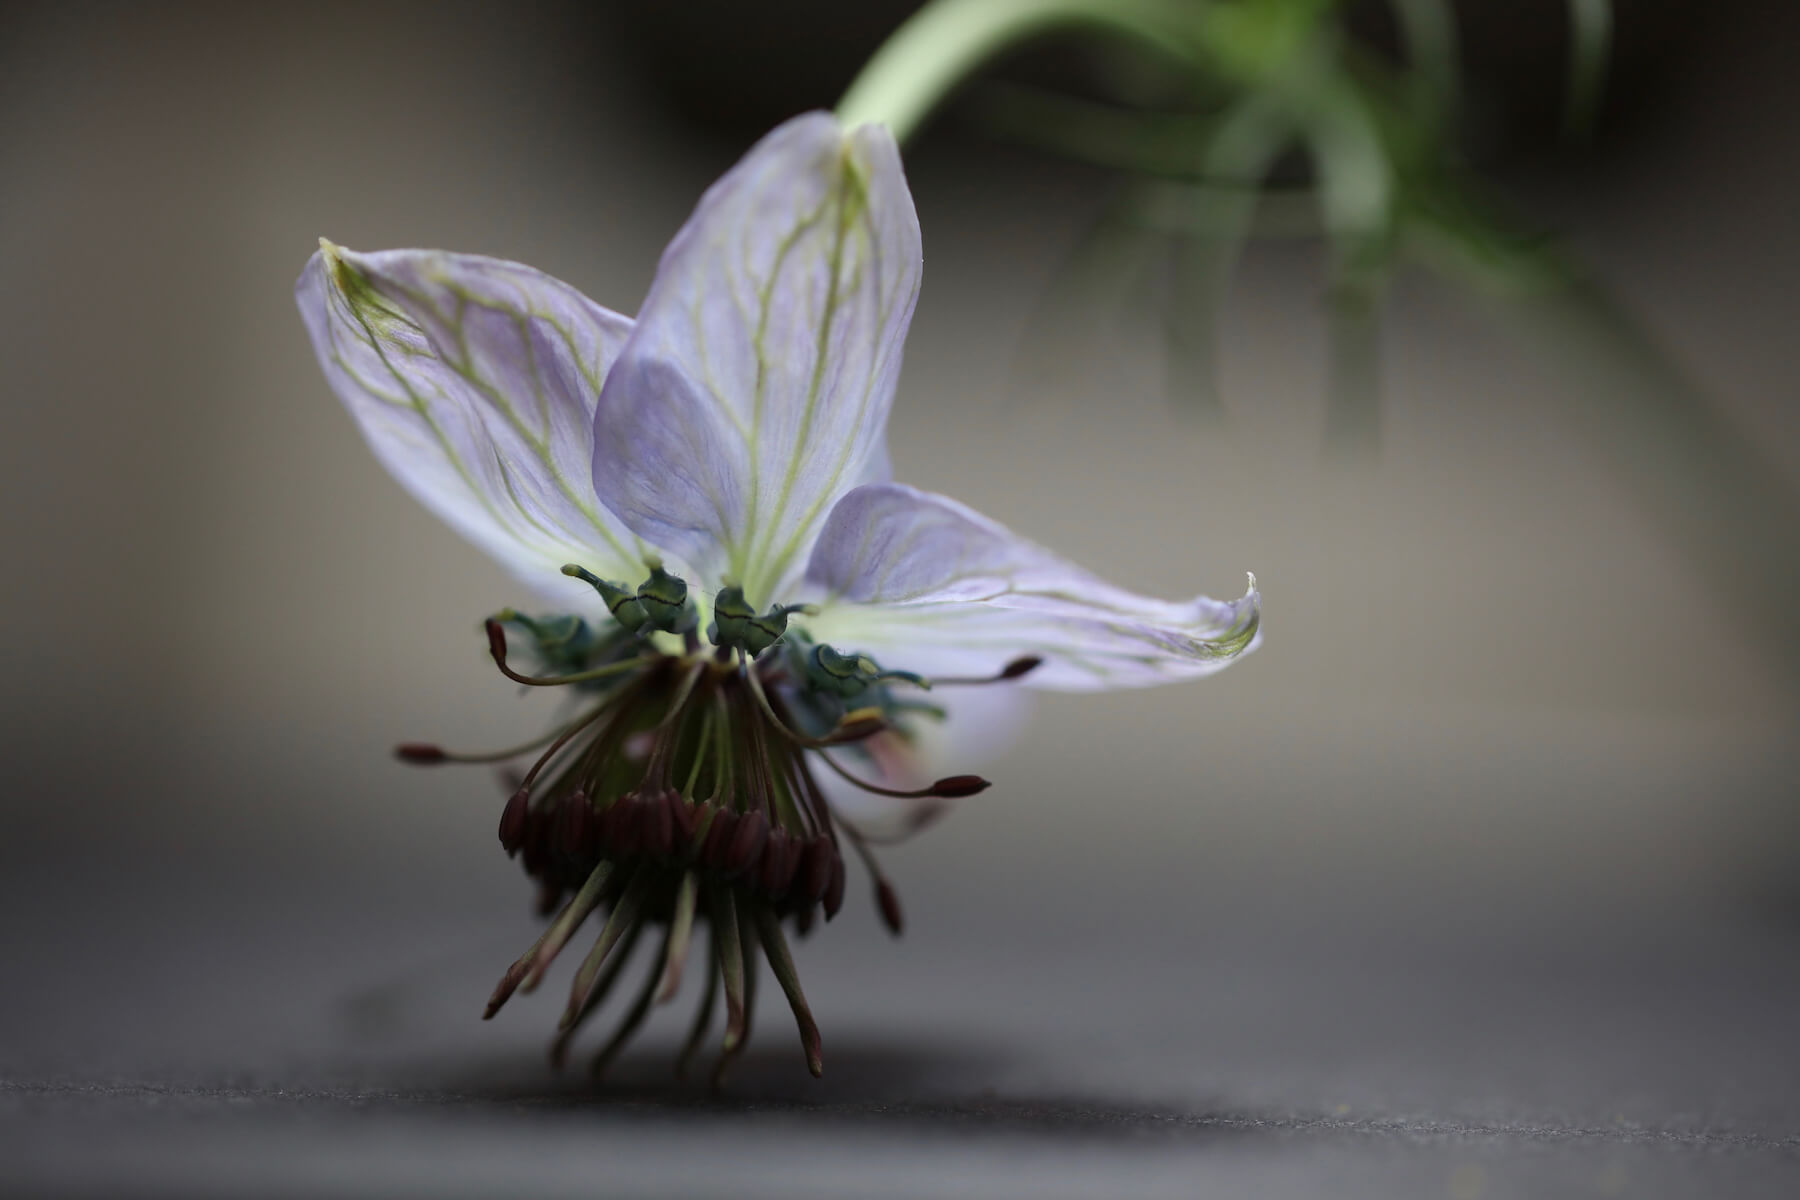 a Nigella flower in detail with blue veined petals and lit beautifully